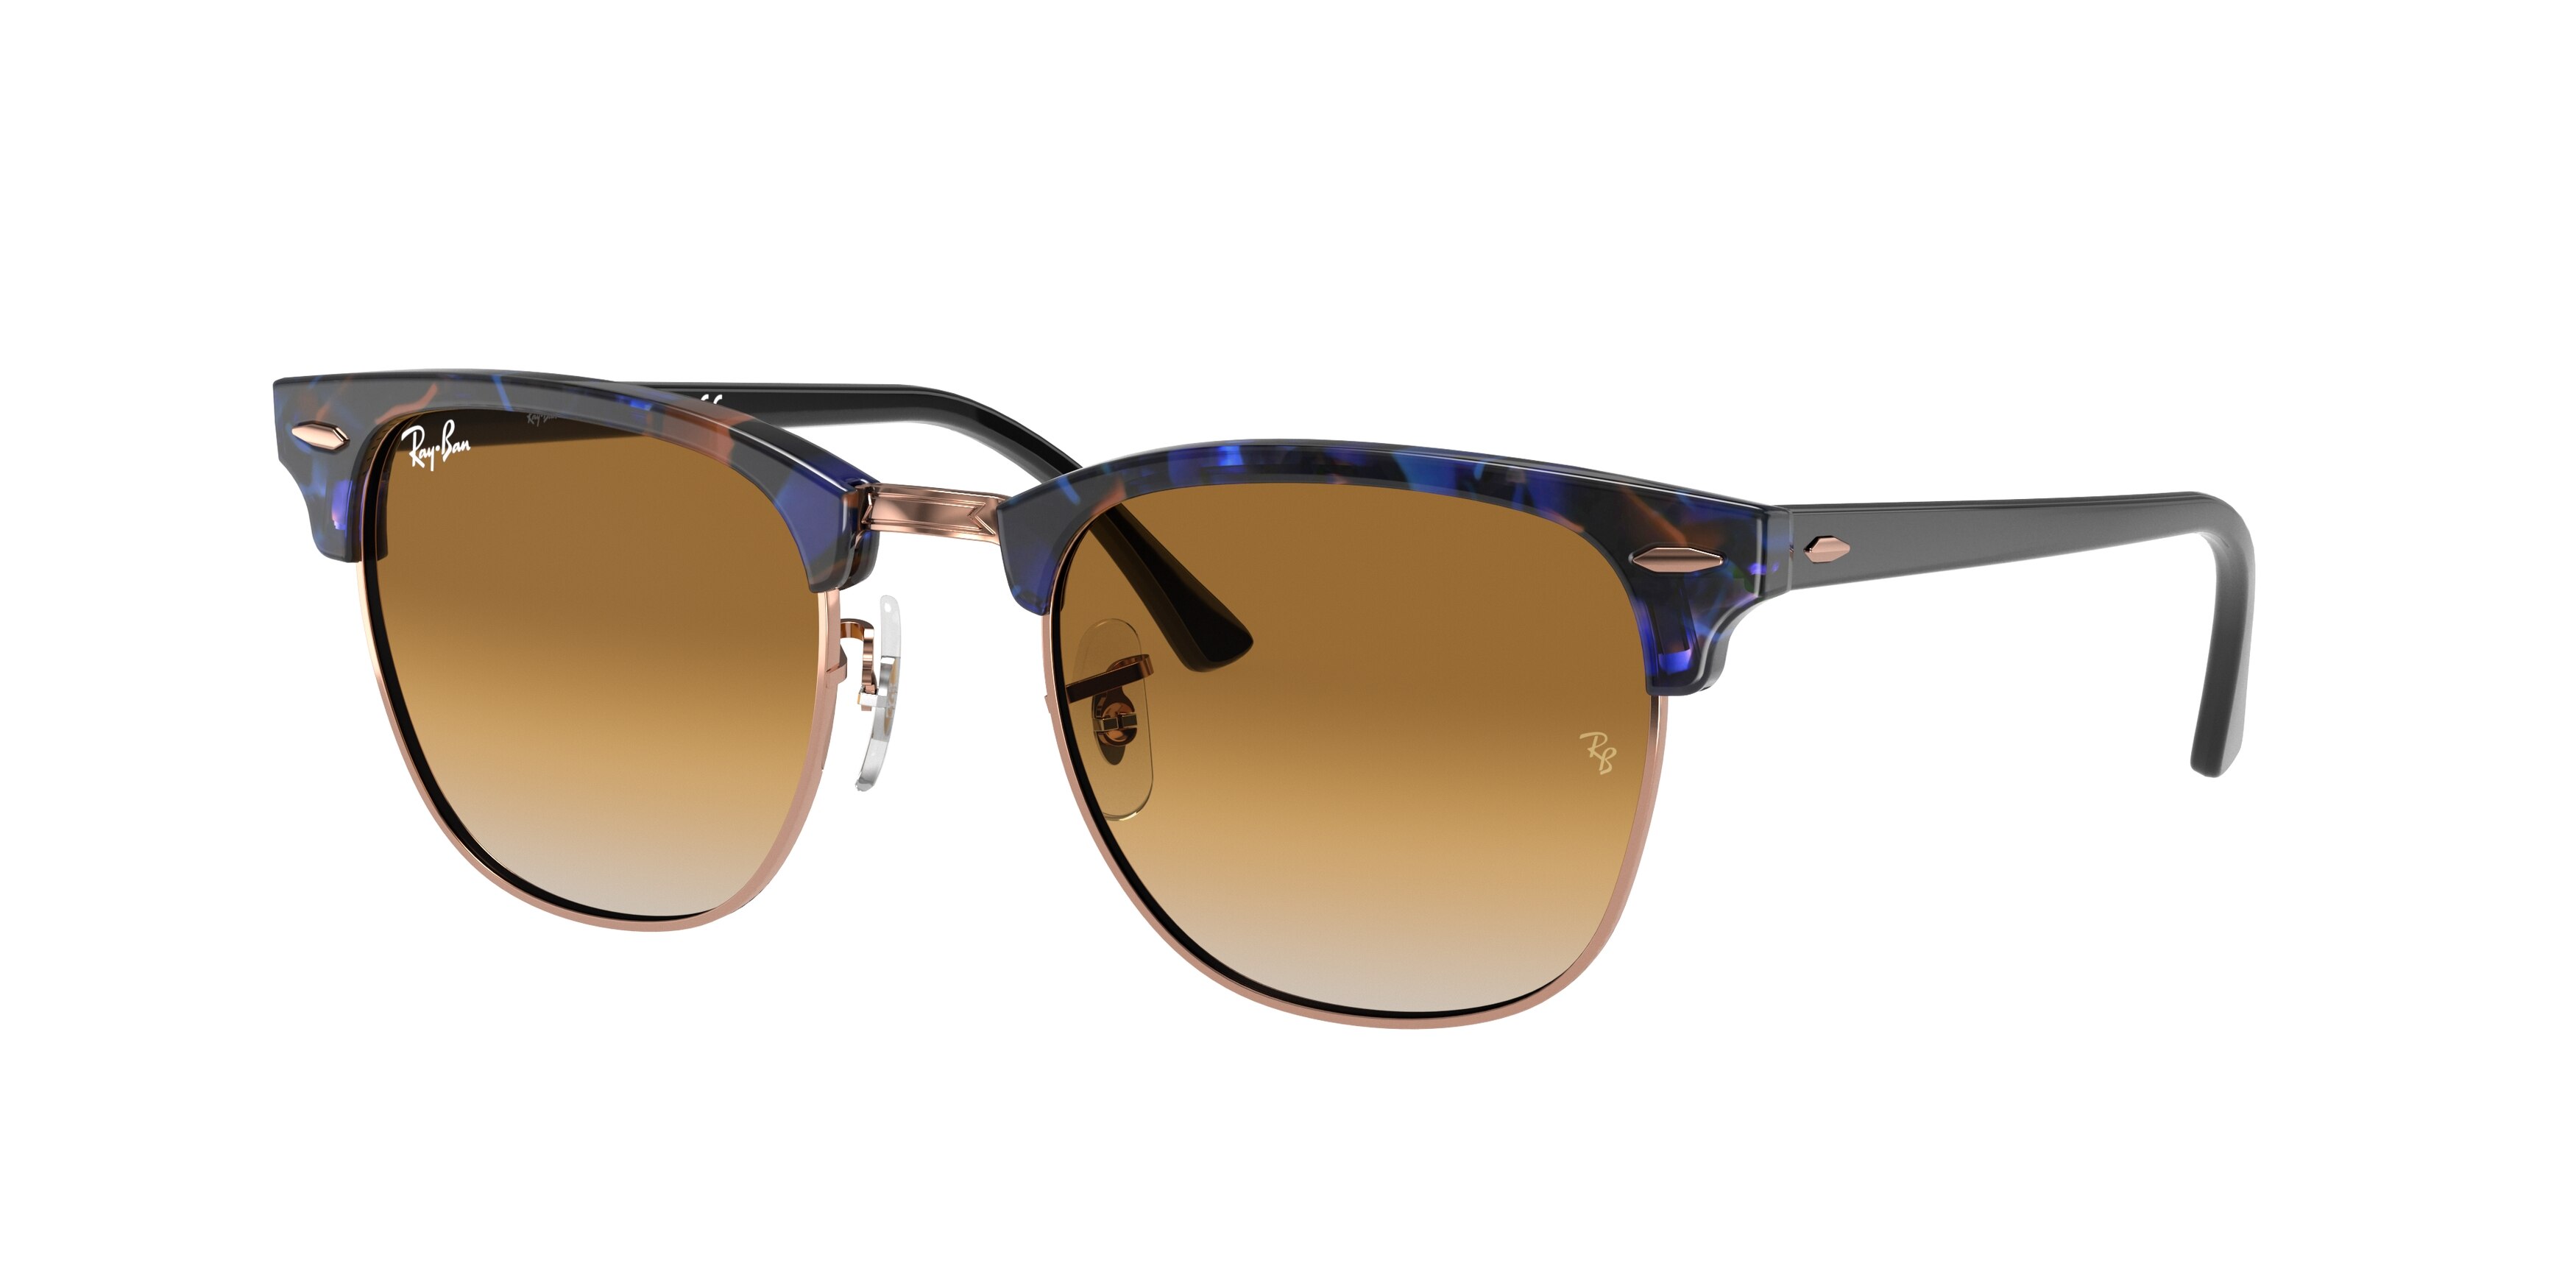 Ray Ban RB3016 125651 Clubmaster 